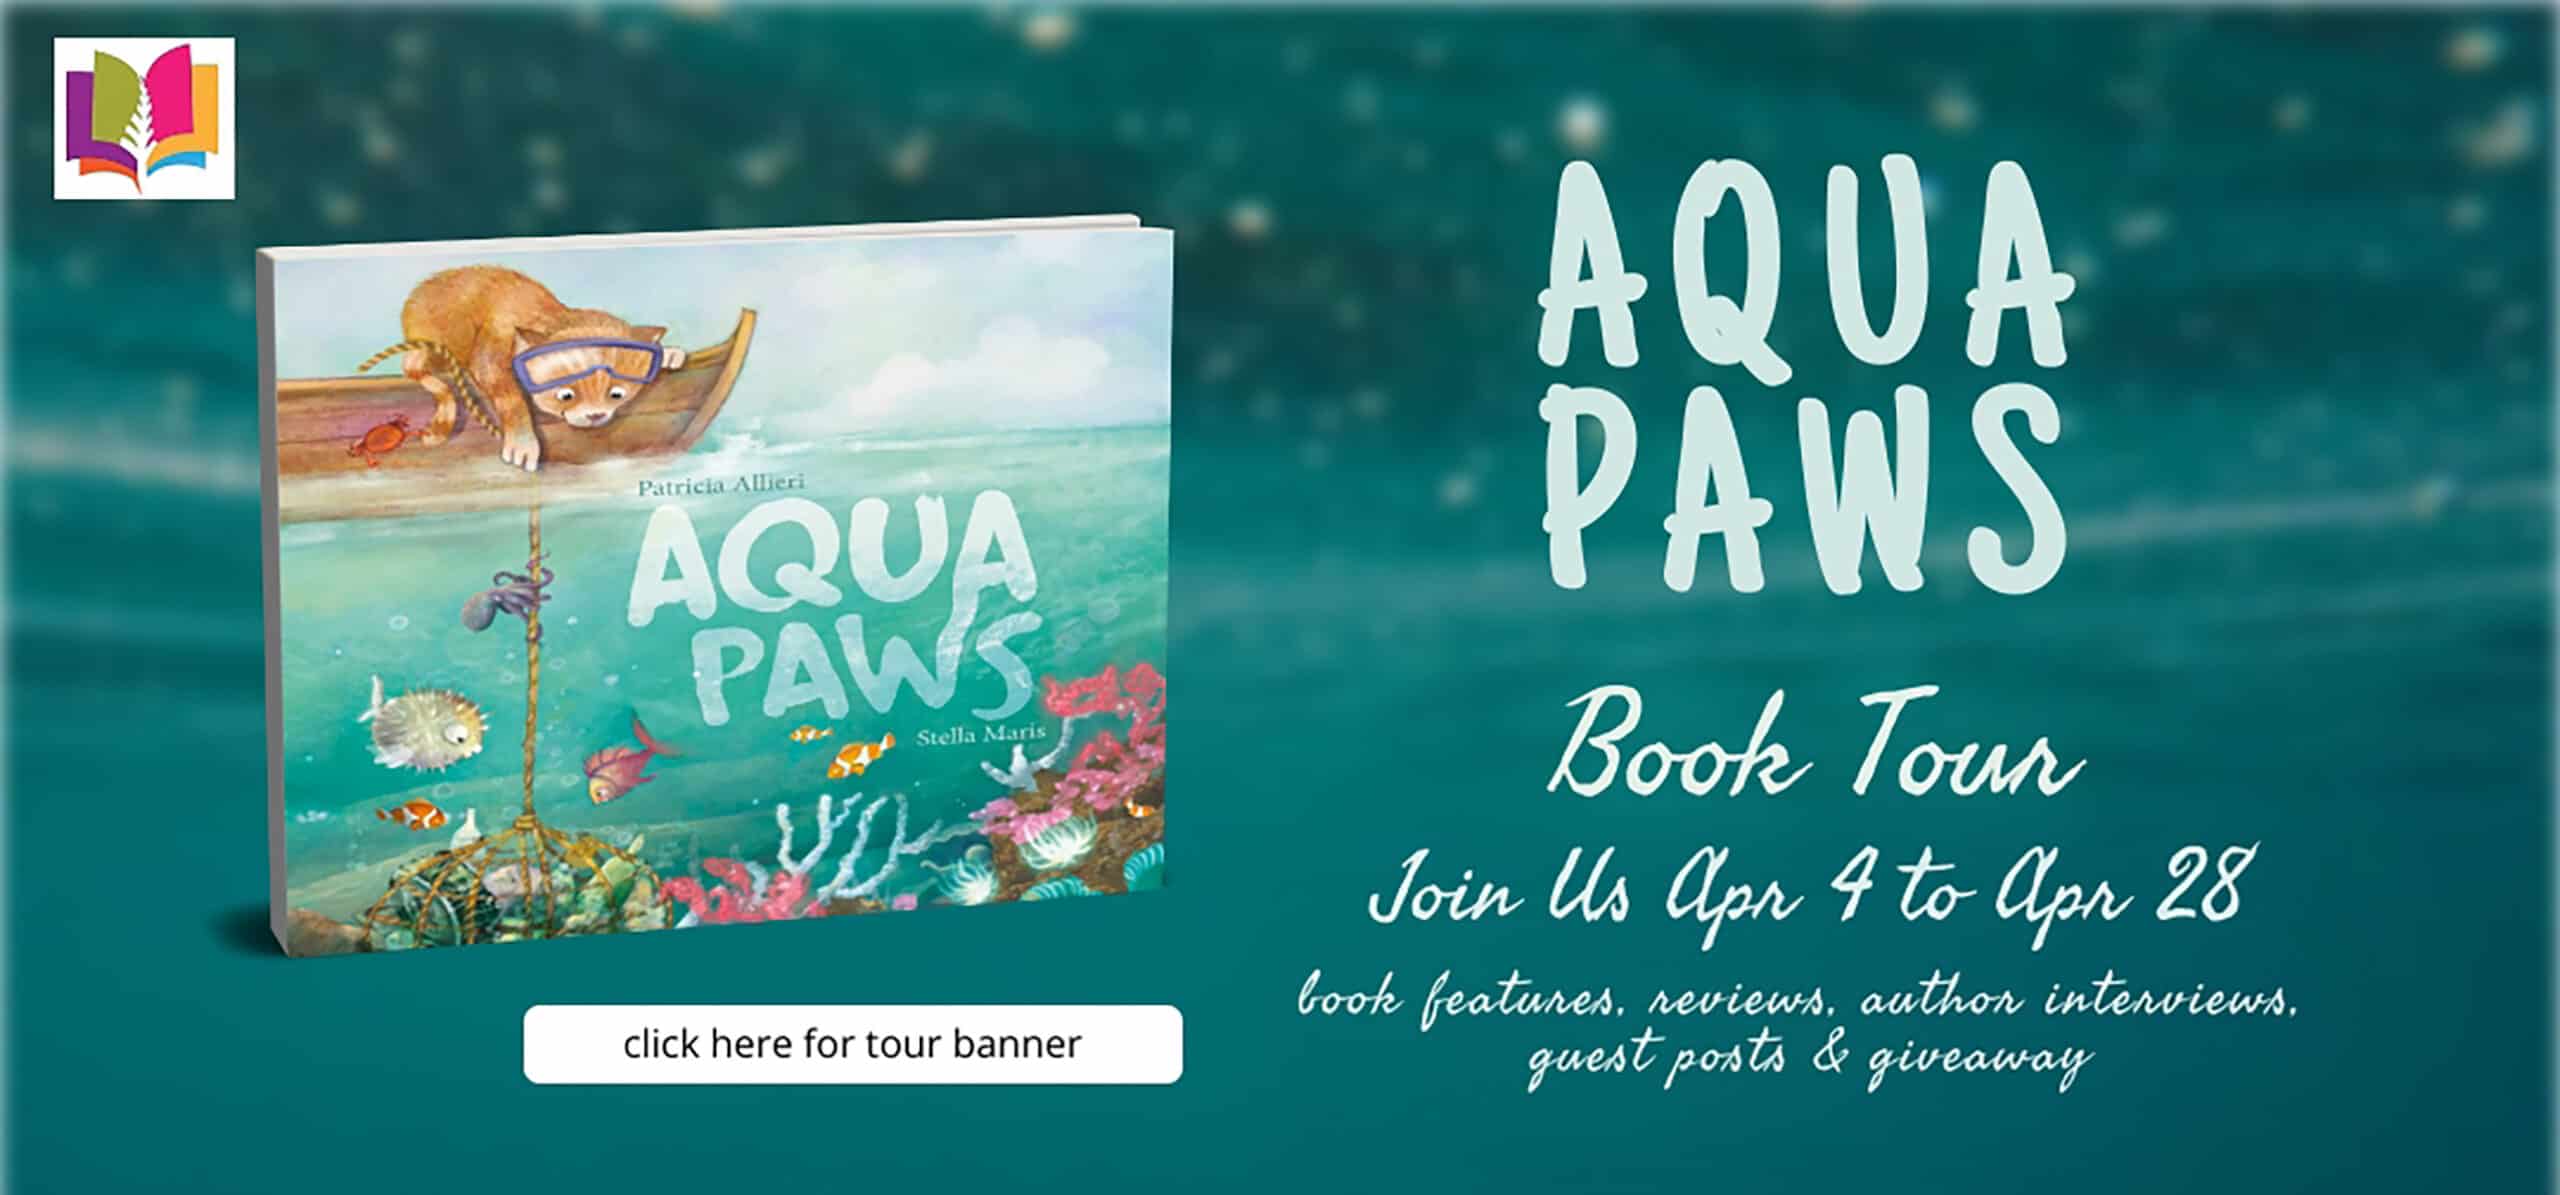 Aqua Paws: A Book about Friendship, Courage, and the Ocean by Patricia Allieri | 5-Star Children's Book Review